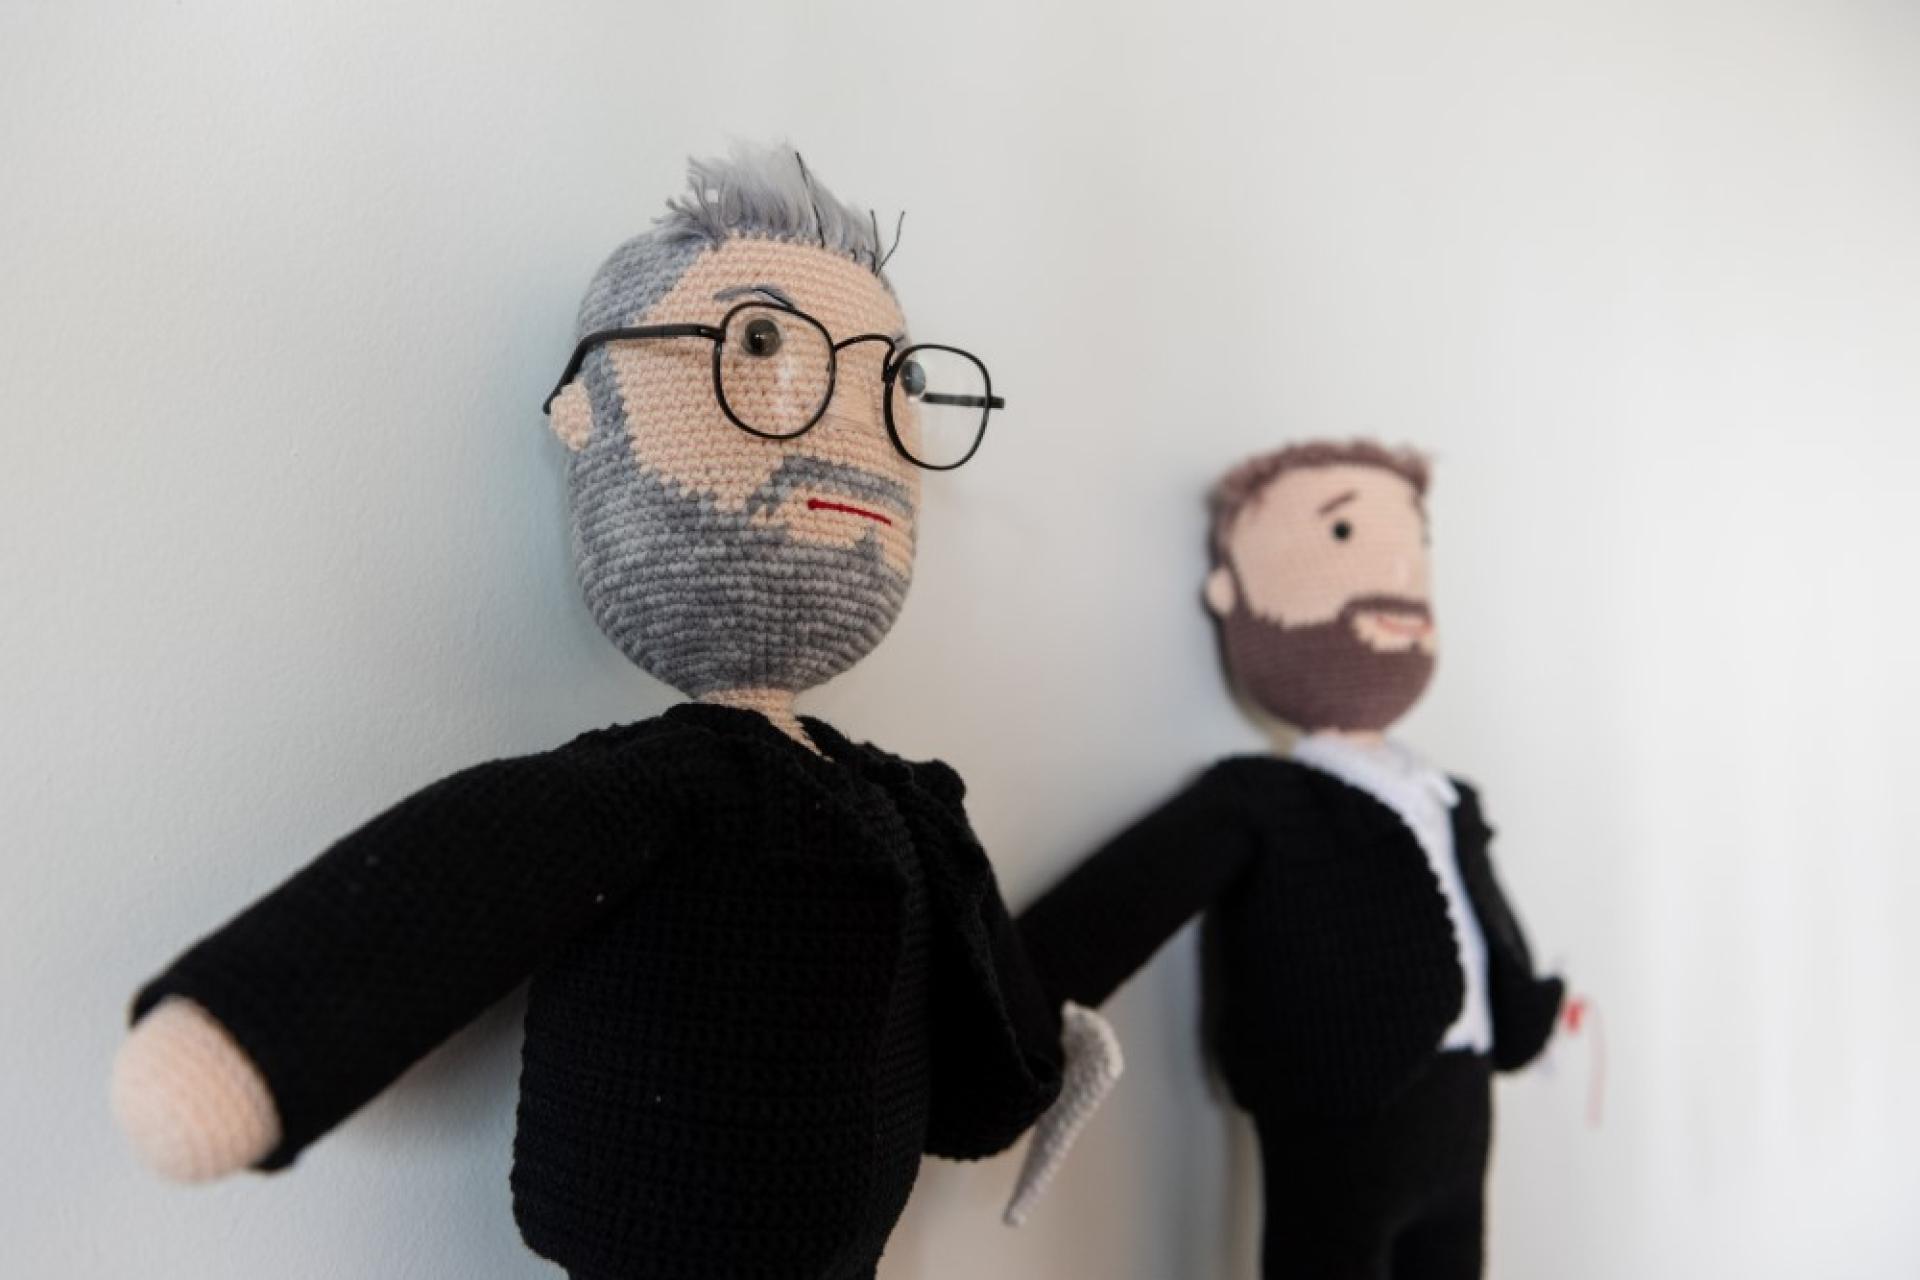 Two puppets against a wall. one with grey hair, bread and glasses and the other with brown hair and a beard